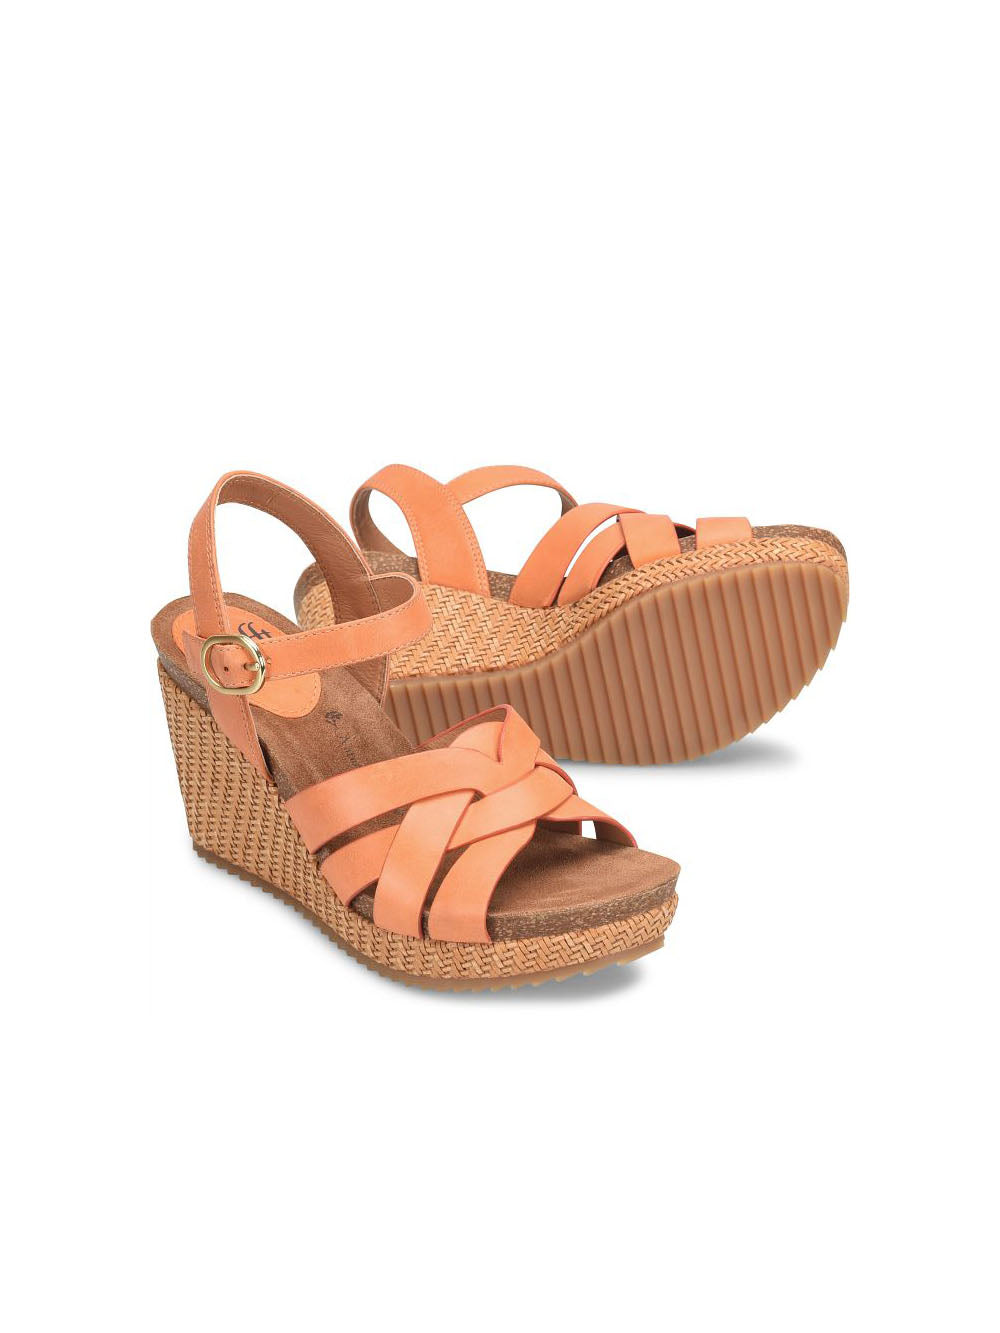 sofft shoes carlana woven wedge sandal in sunset orange